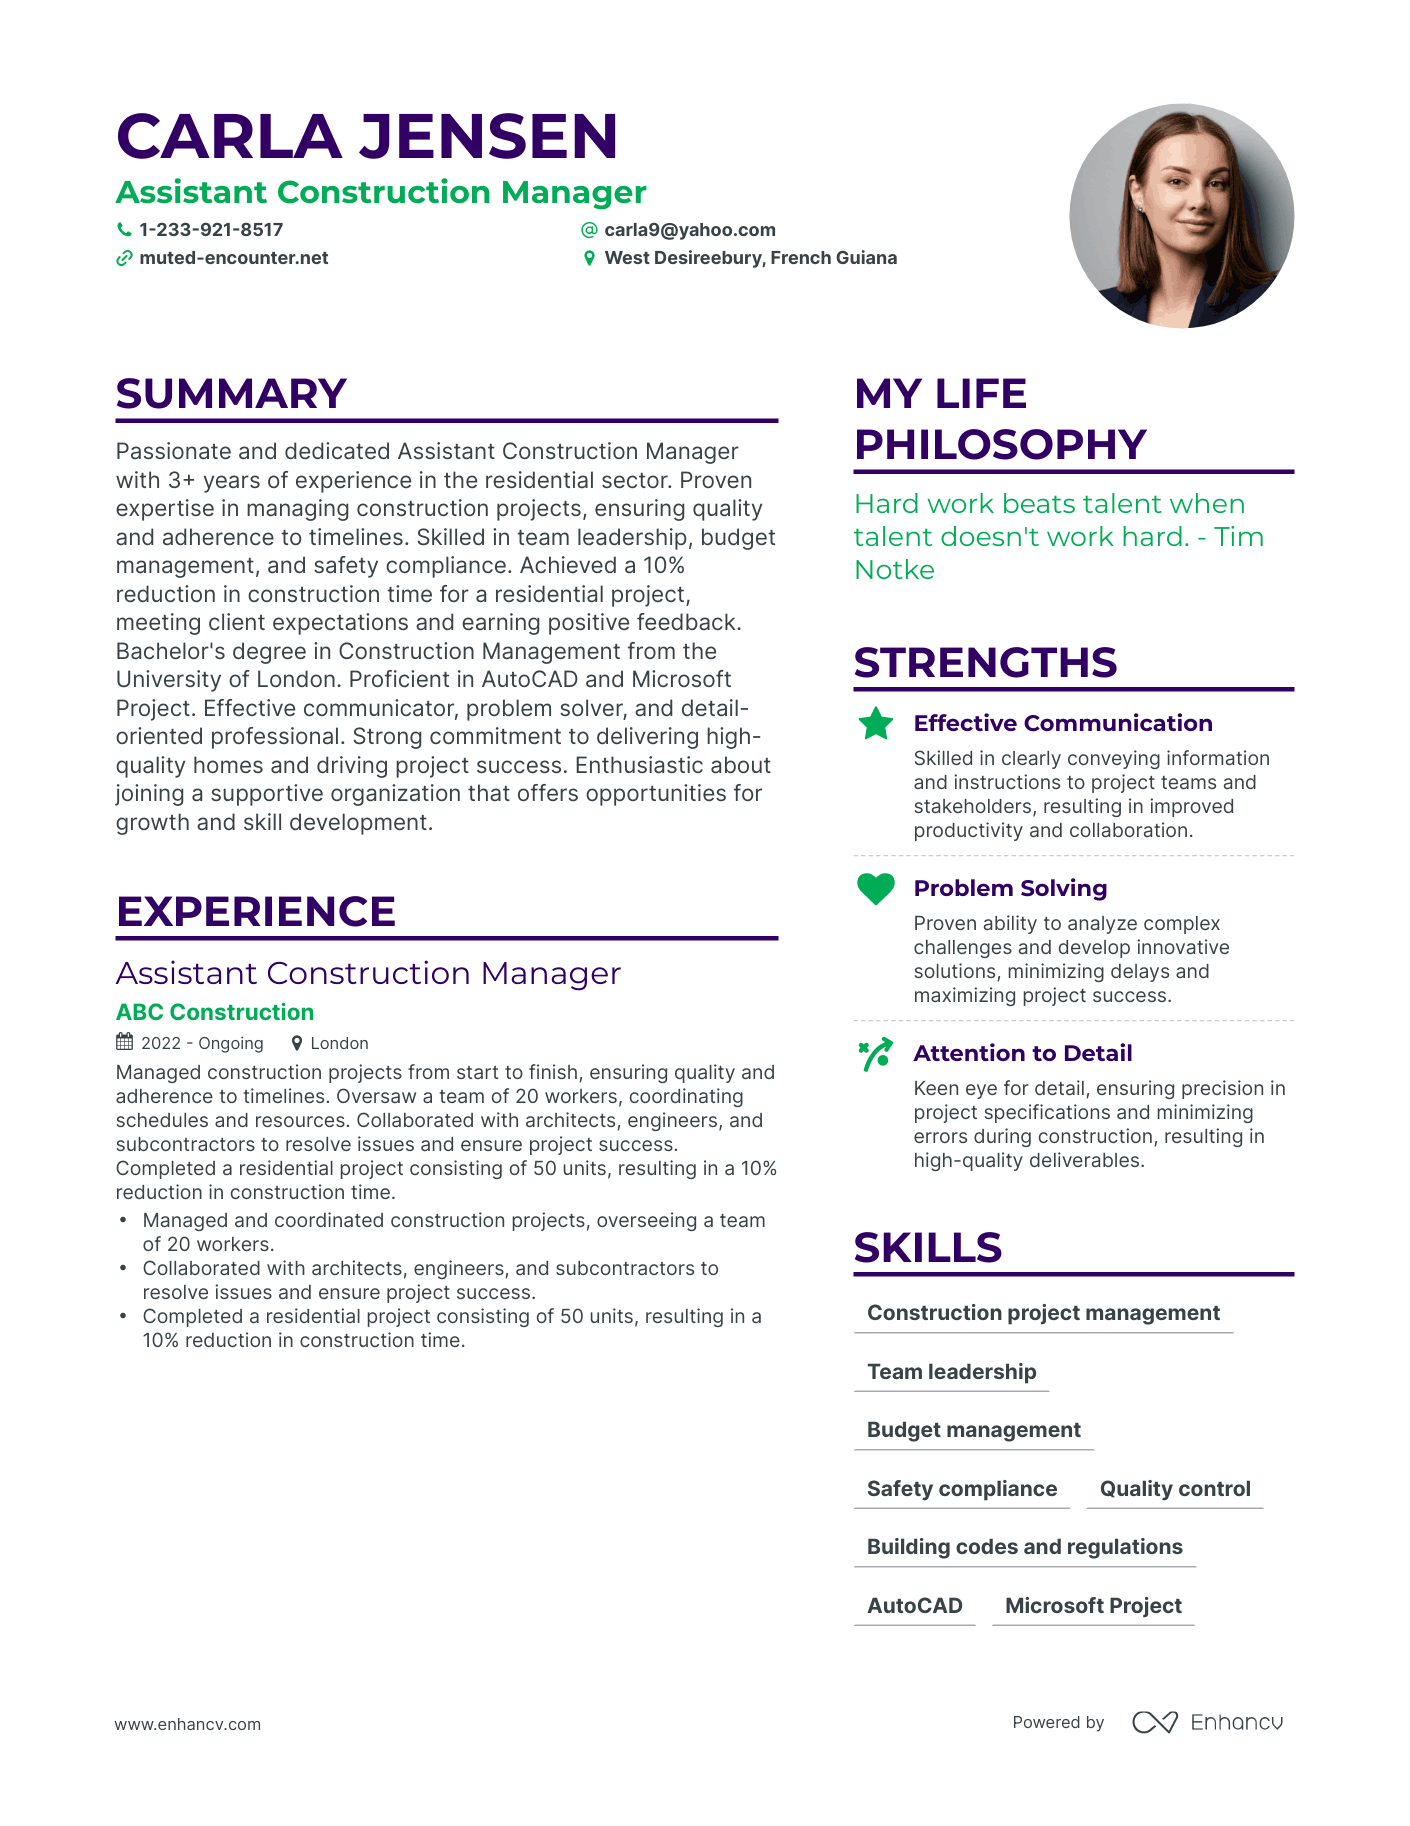 Assistant Construction Manager resume example